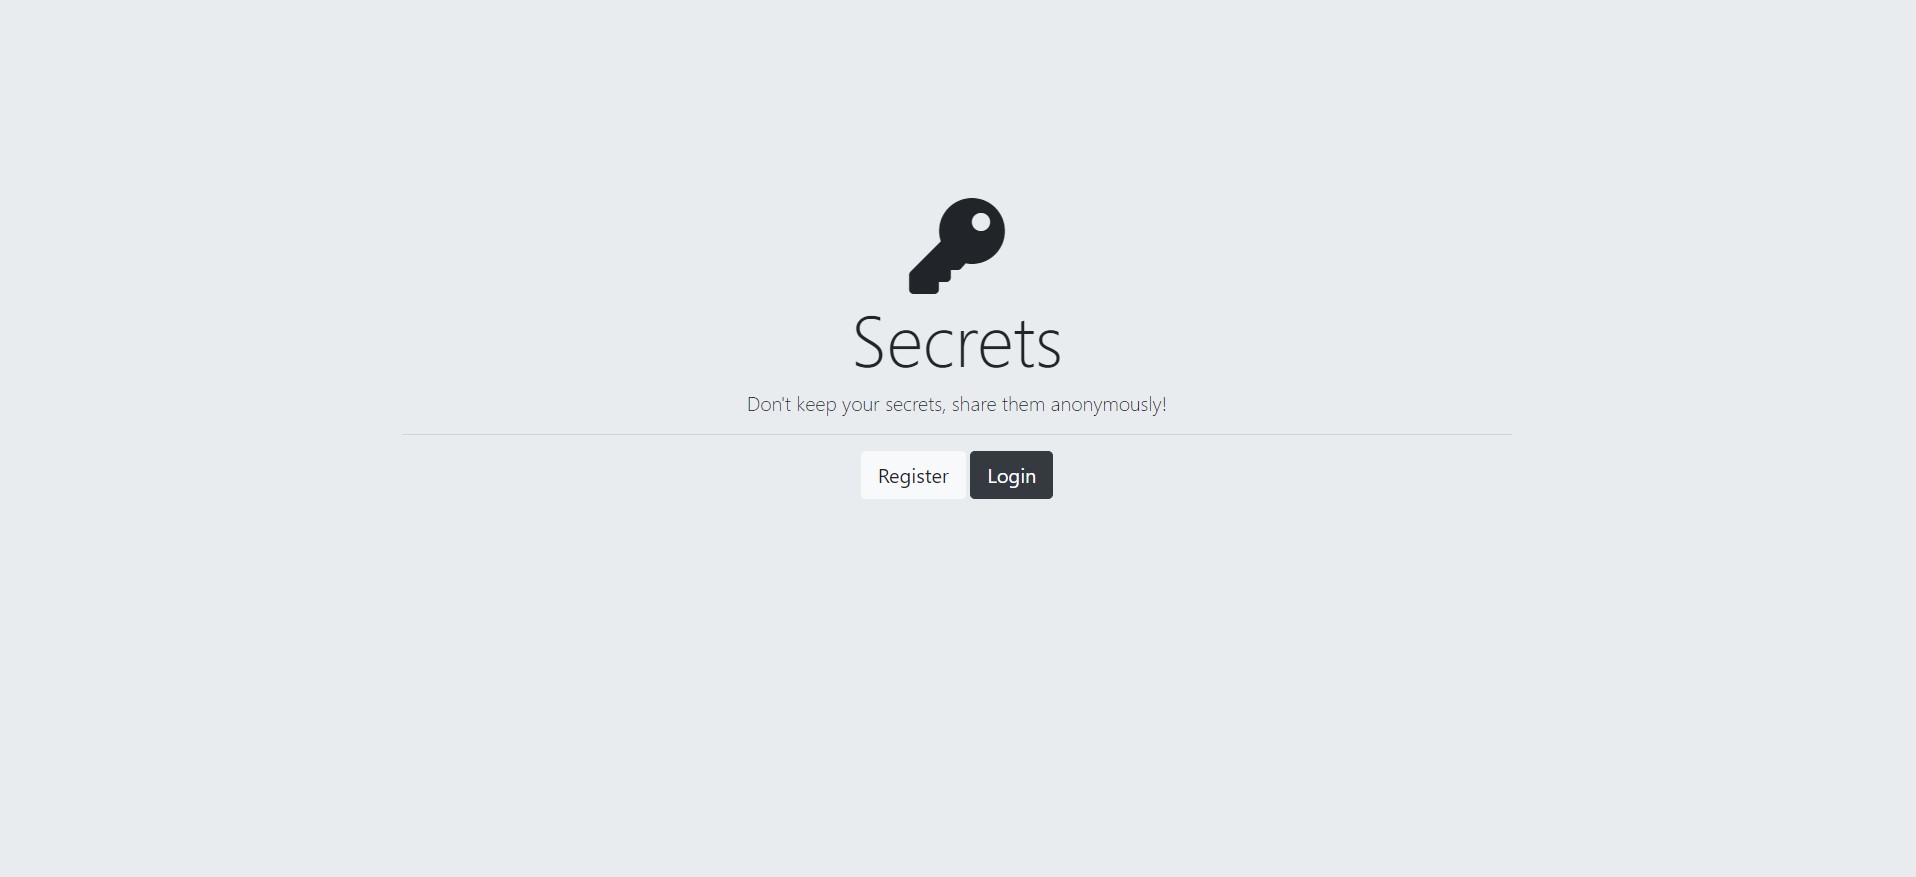 Secrets application with database